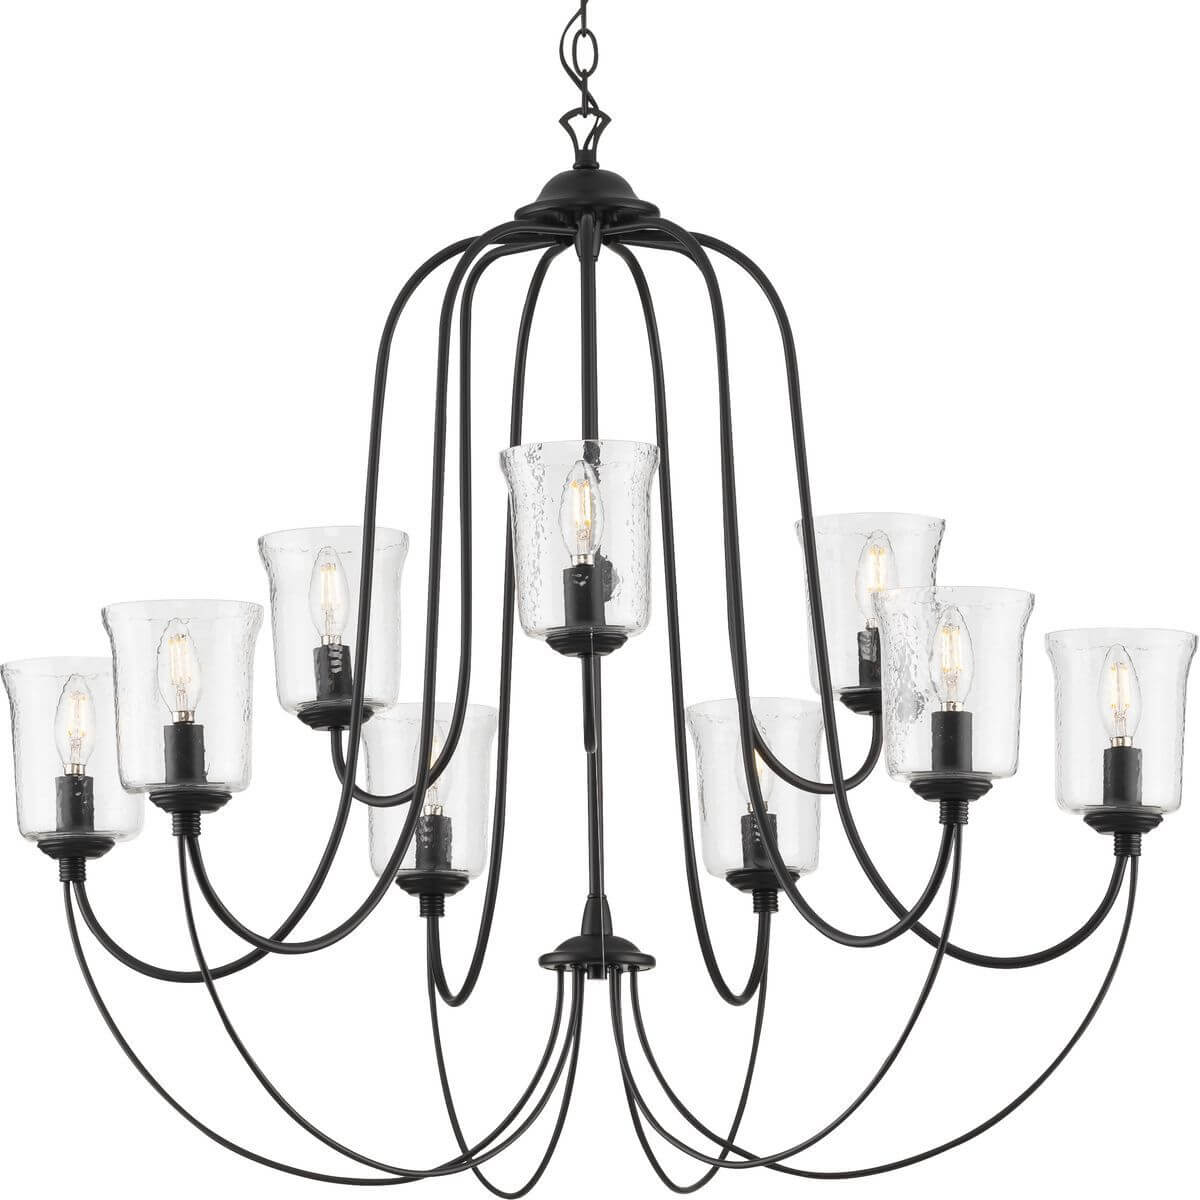 Progress Lighting Bowman 9 Light 37 inch Chandelier in Matte Black with Clear Chiseled Glass Shade P400196-031